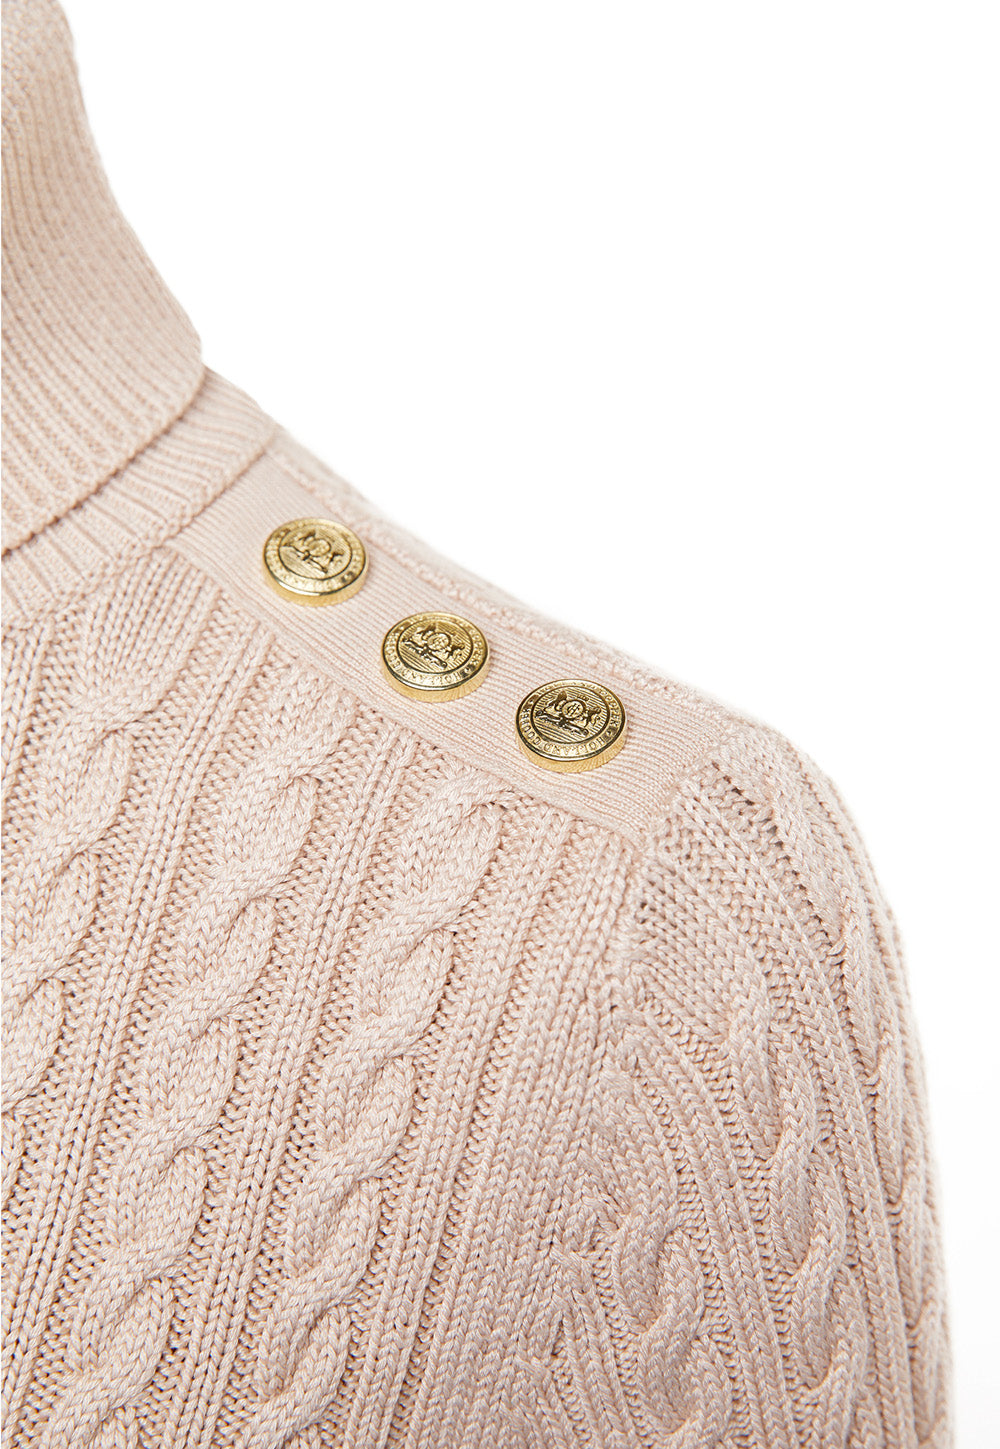 Seattle Roll Neck Cable Knit - Oatmeal sold by Angel Divine